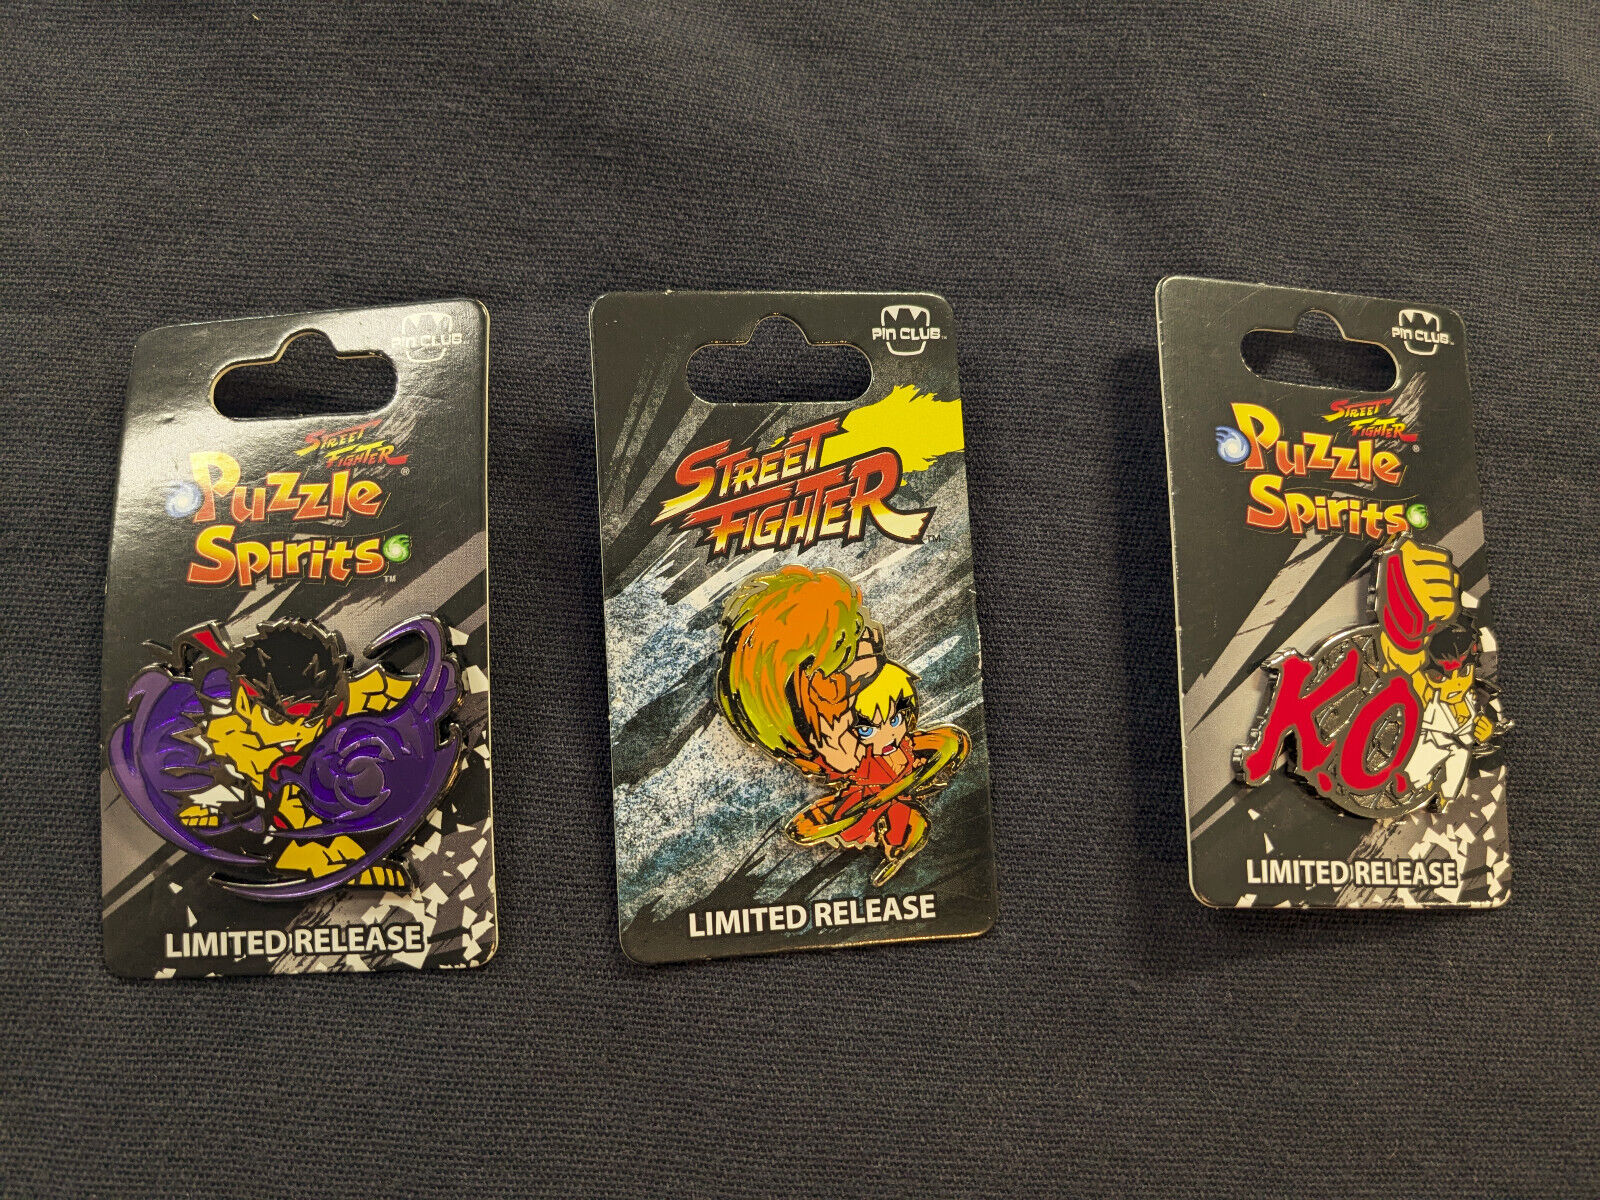 Lot of 3 Street Fighter / Puzzle Spirits Pin Club Limited Release Pins